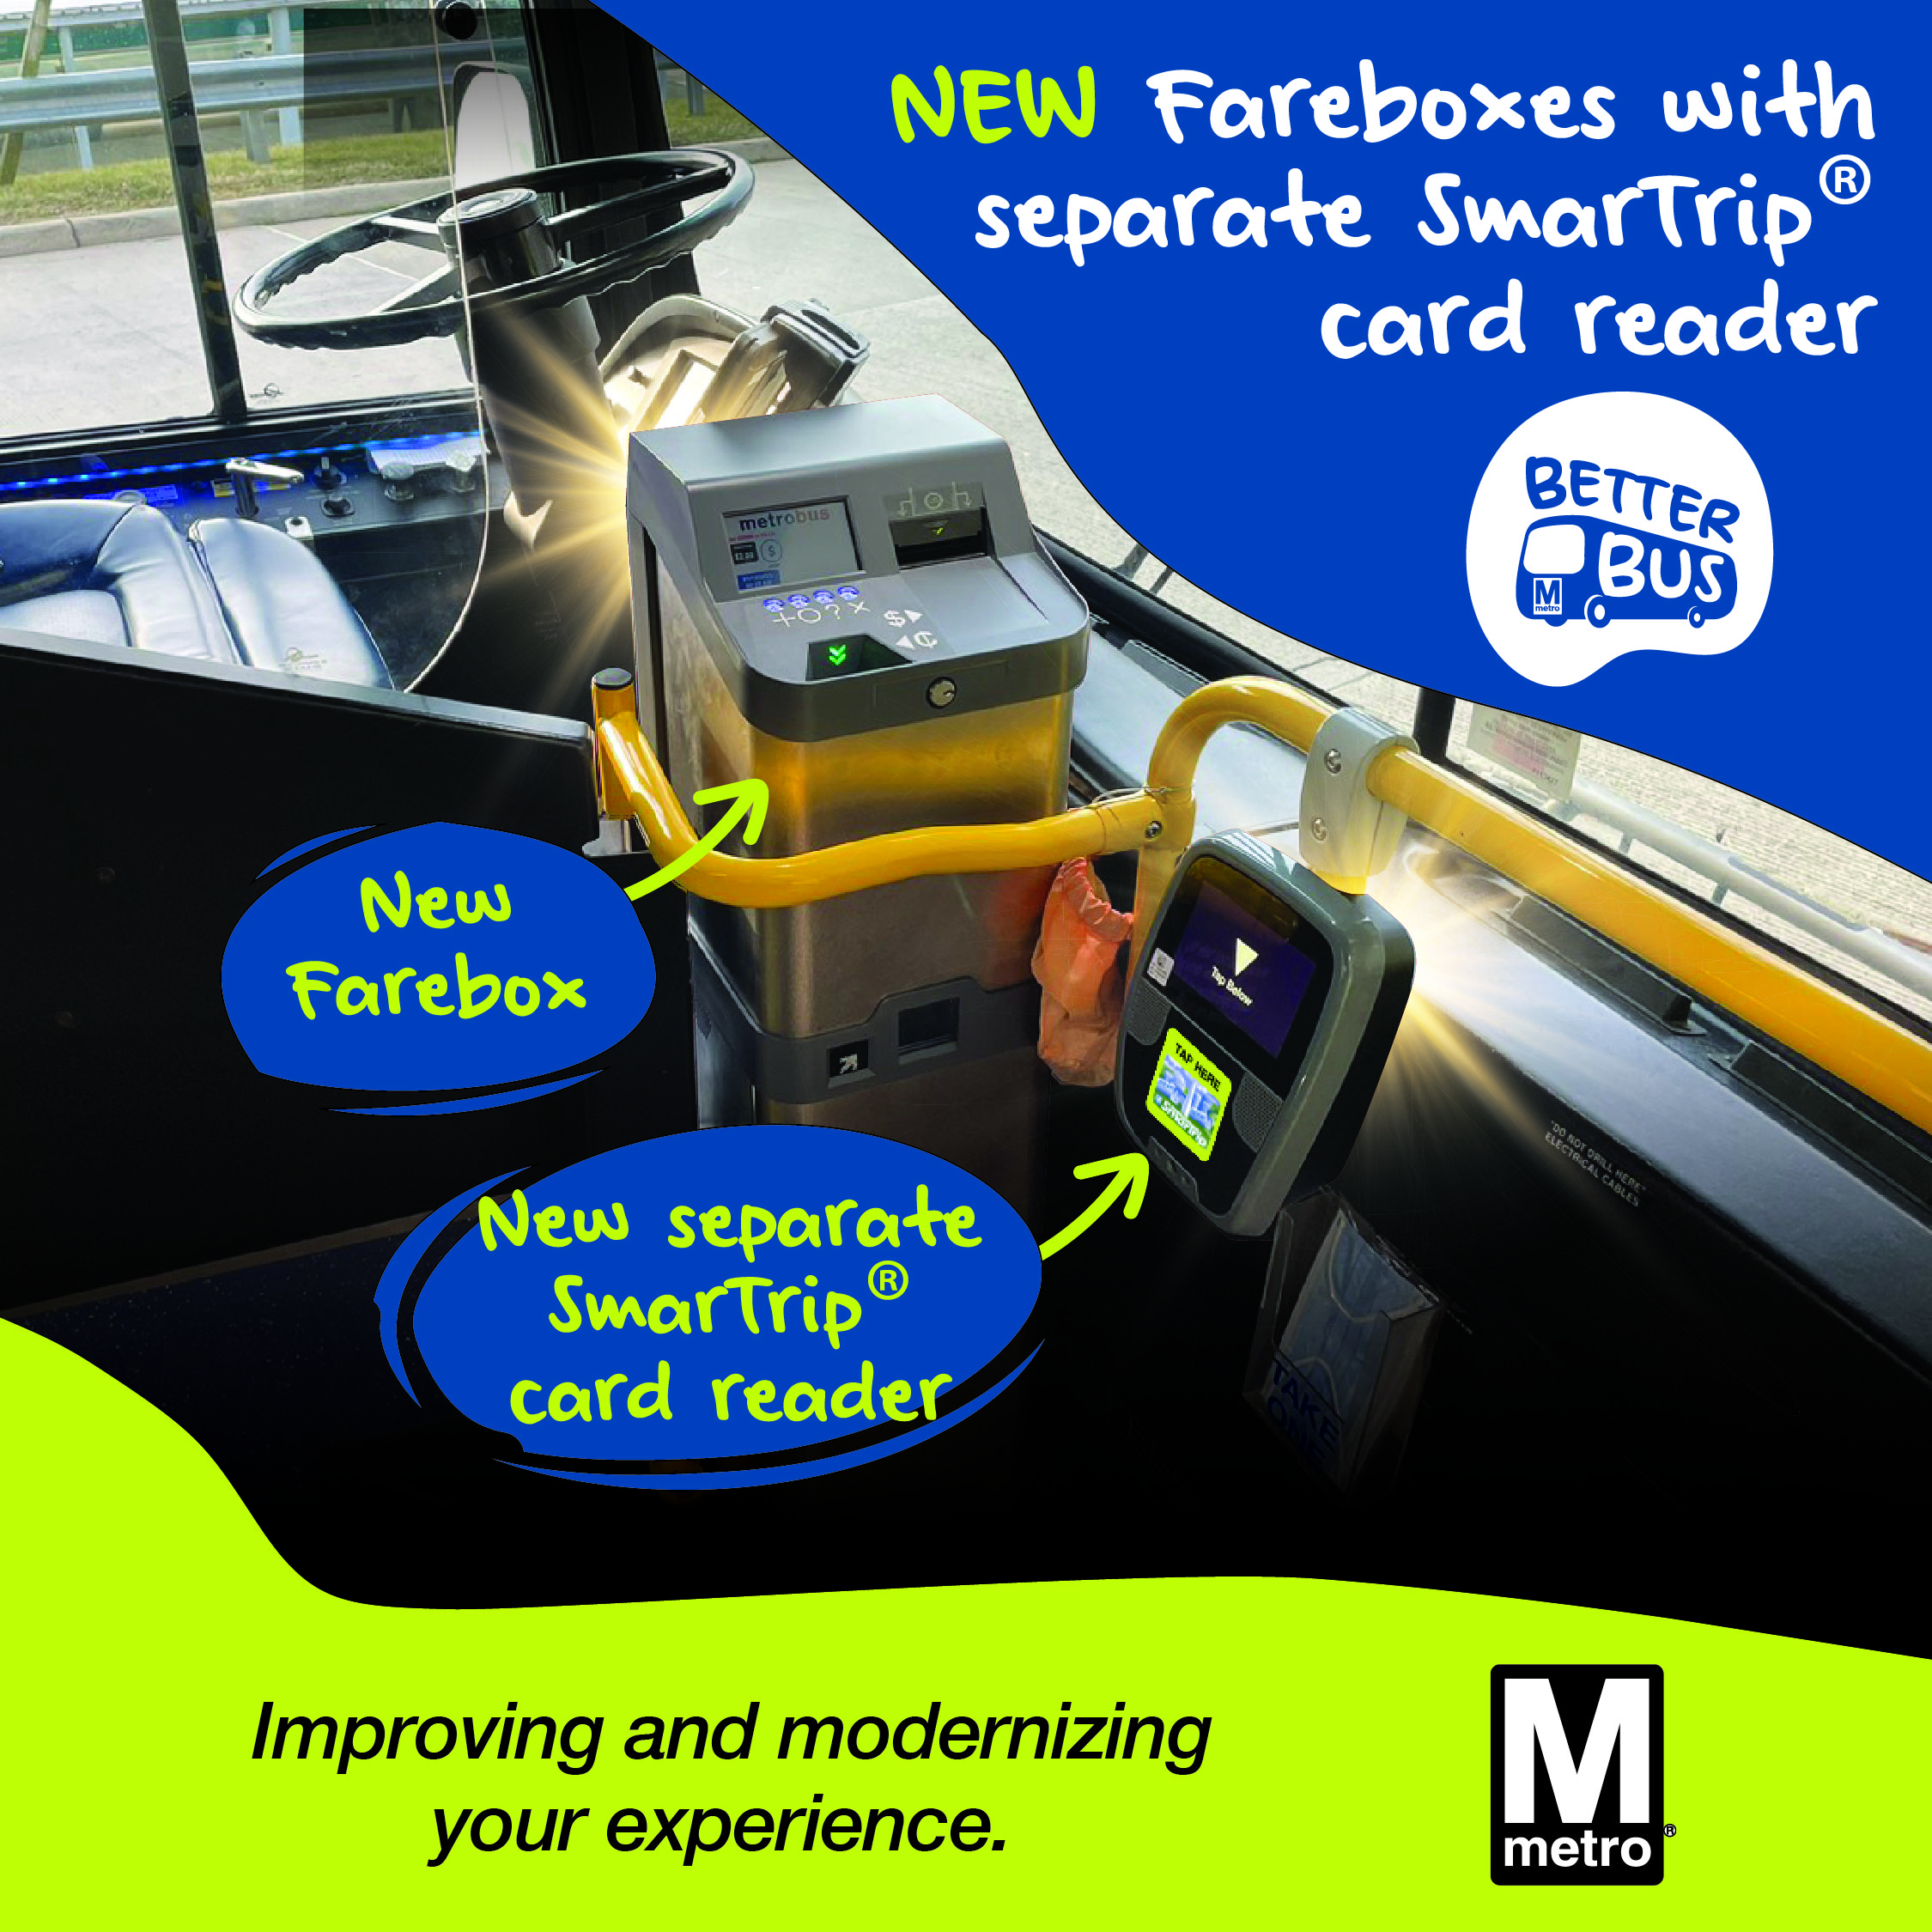 New fareboxes with separate SmarTrip card reader